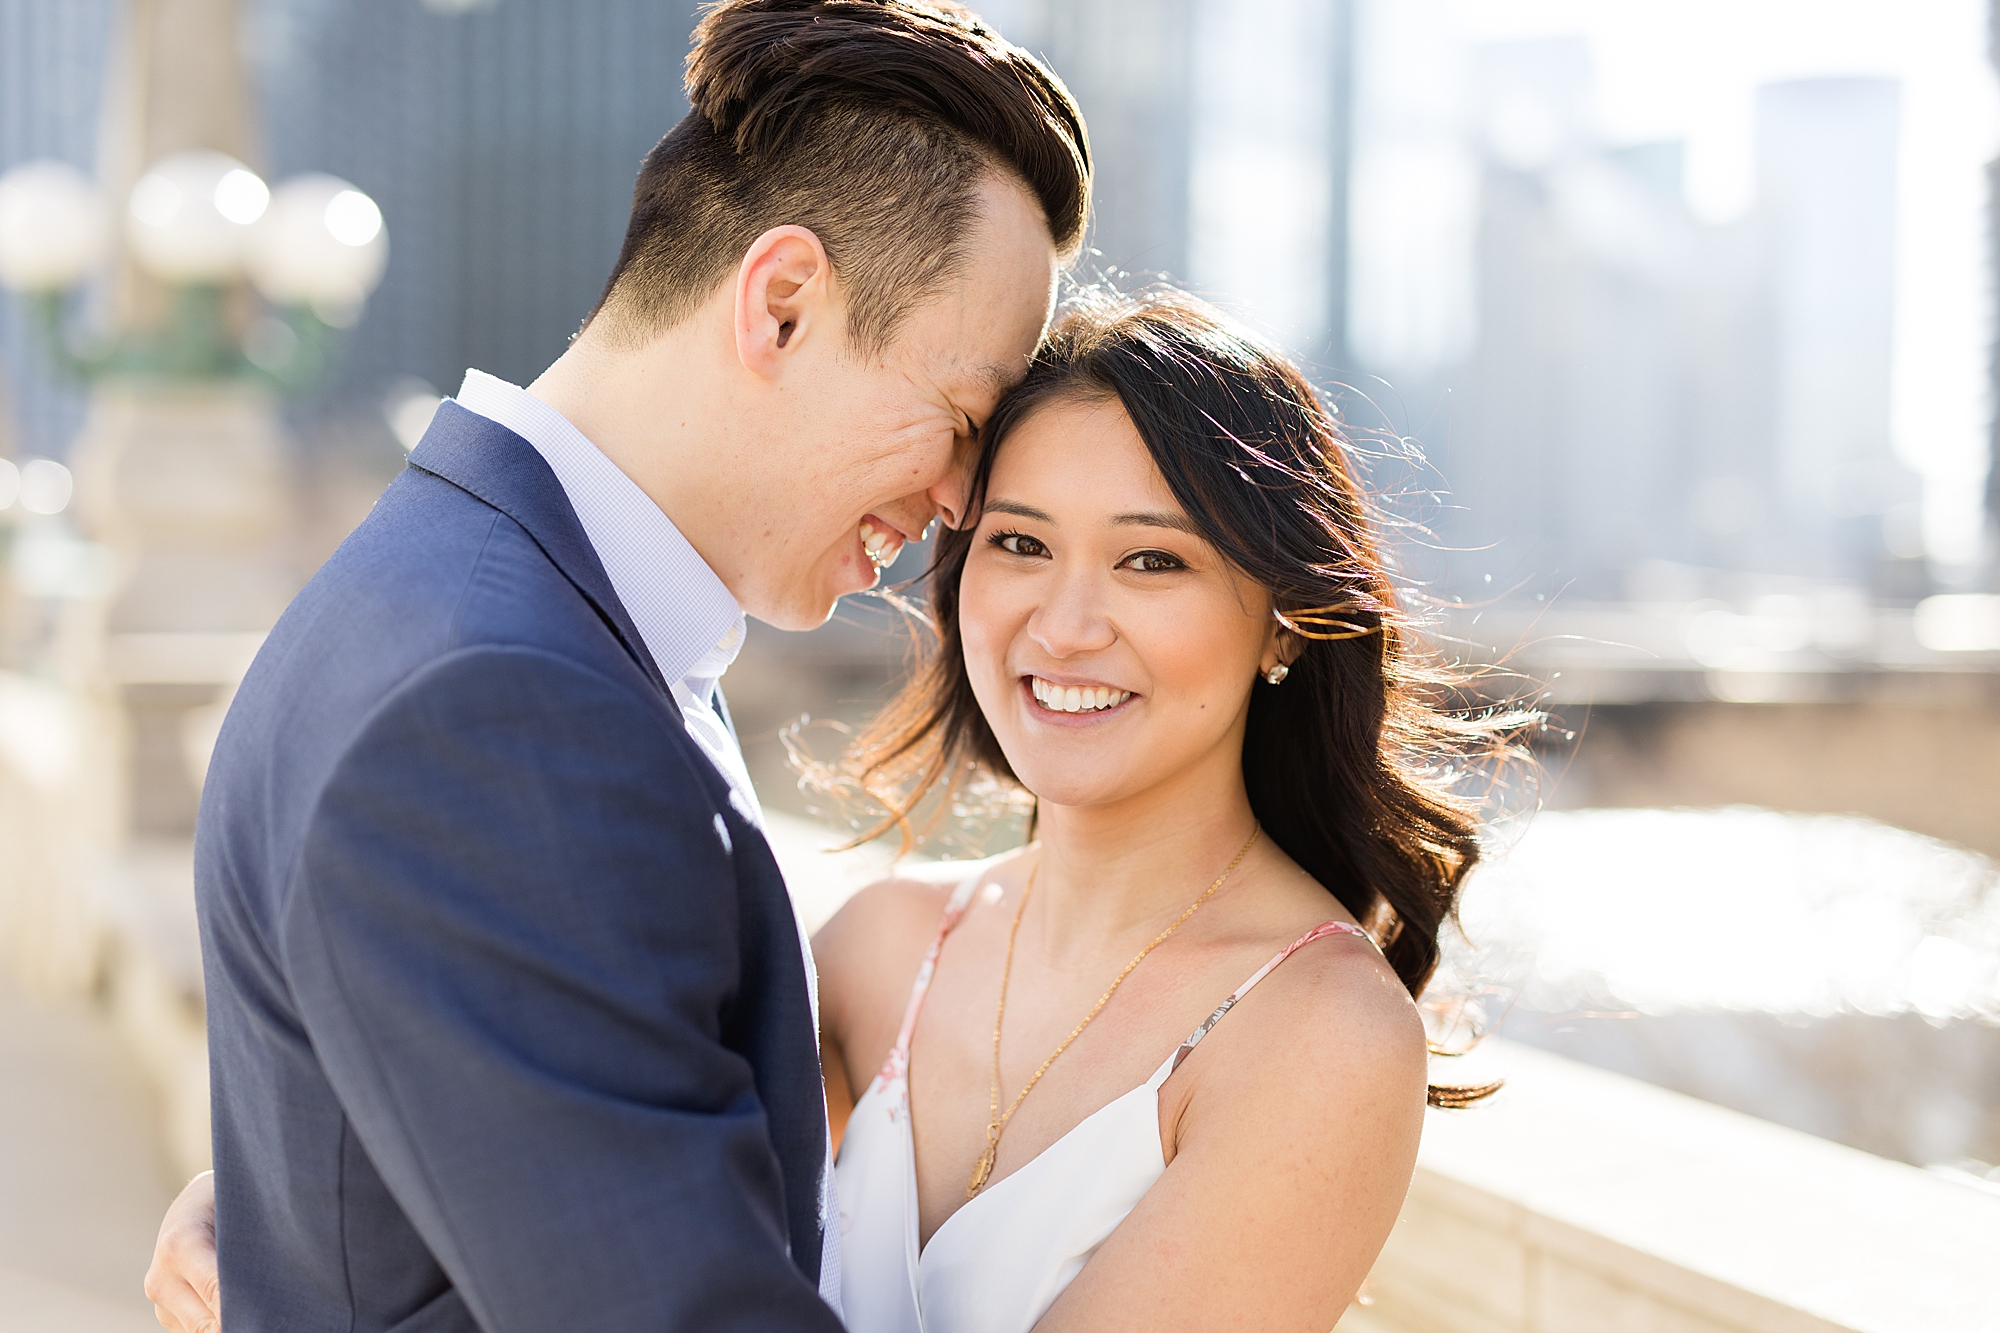 A classic early spring engagement in Downtown Chicago by Breanne Rochelle Photography.